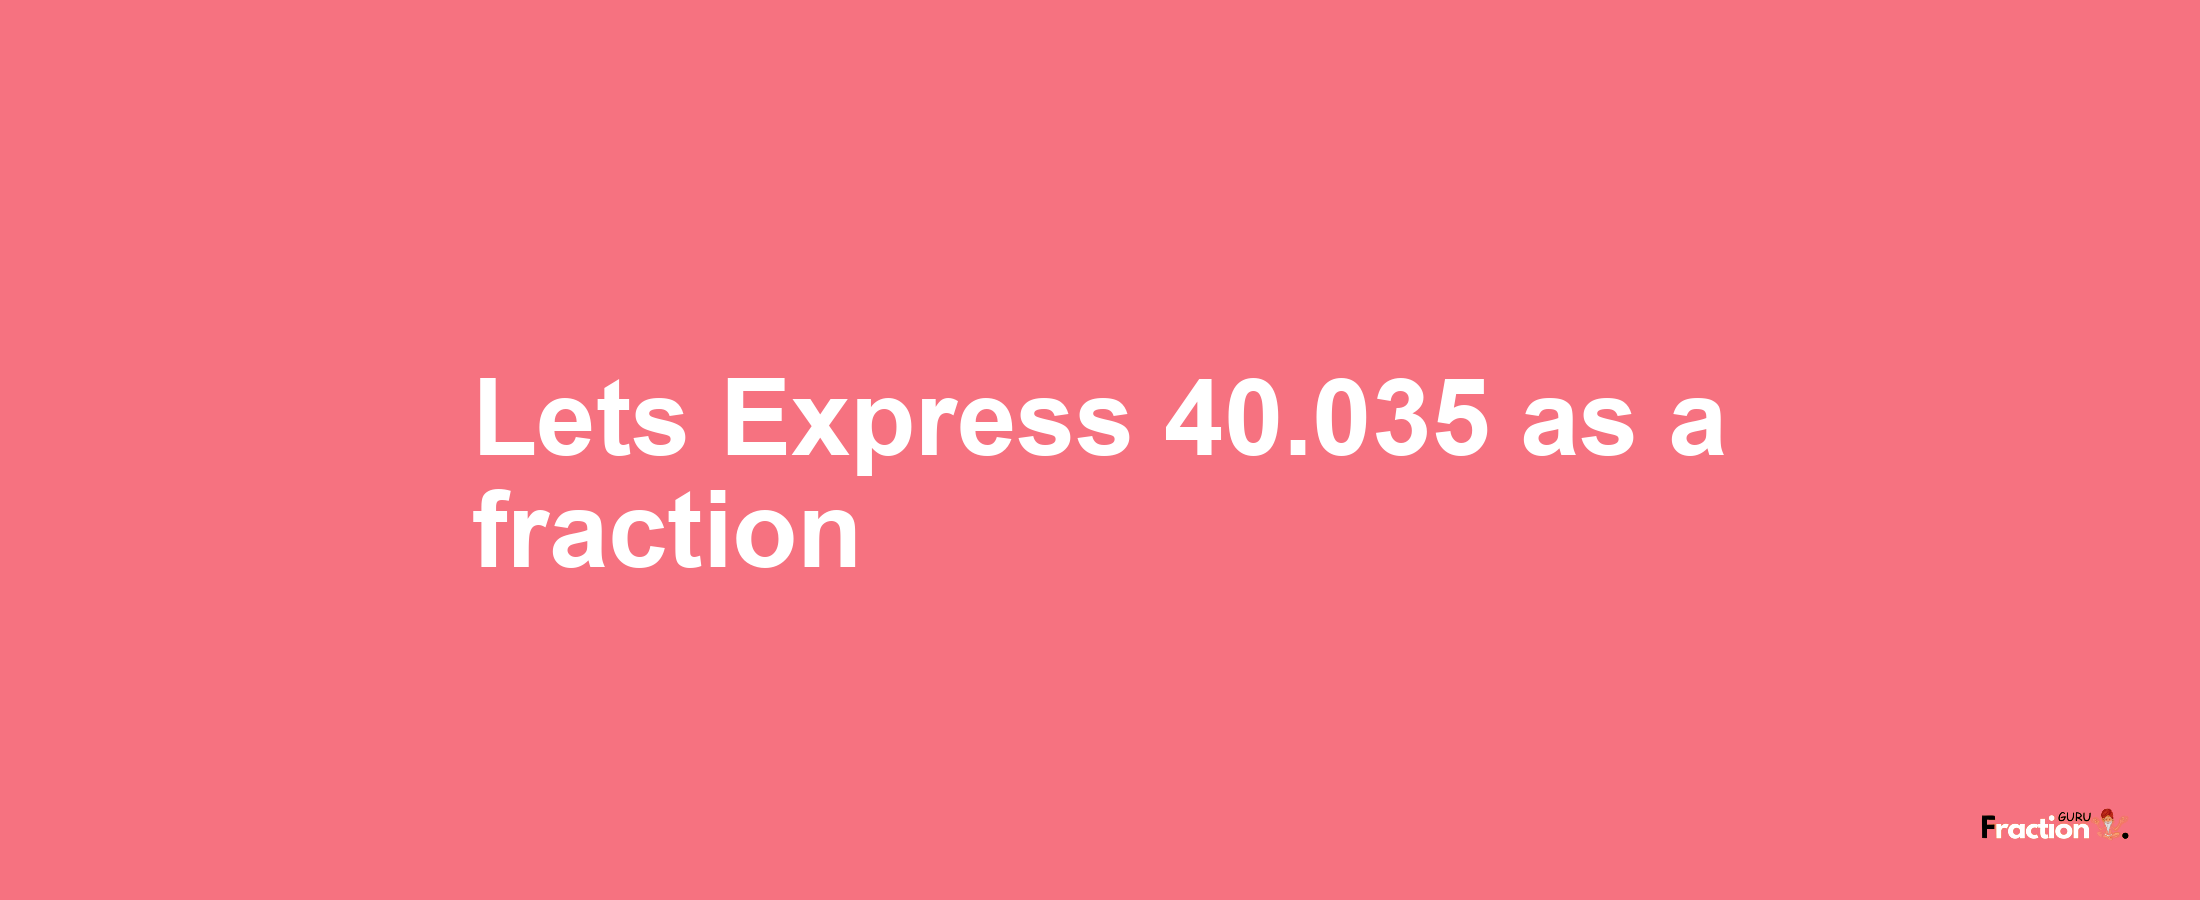 Lets Express 40.035 as afraction